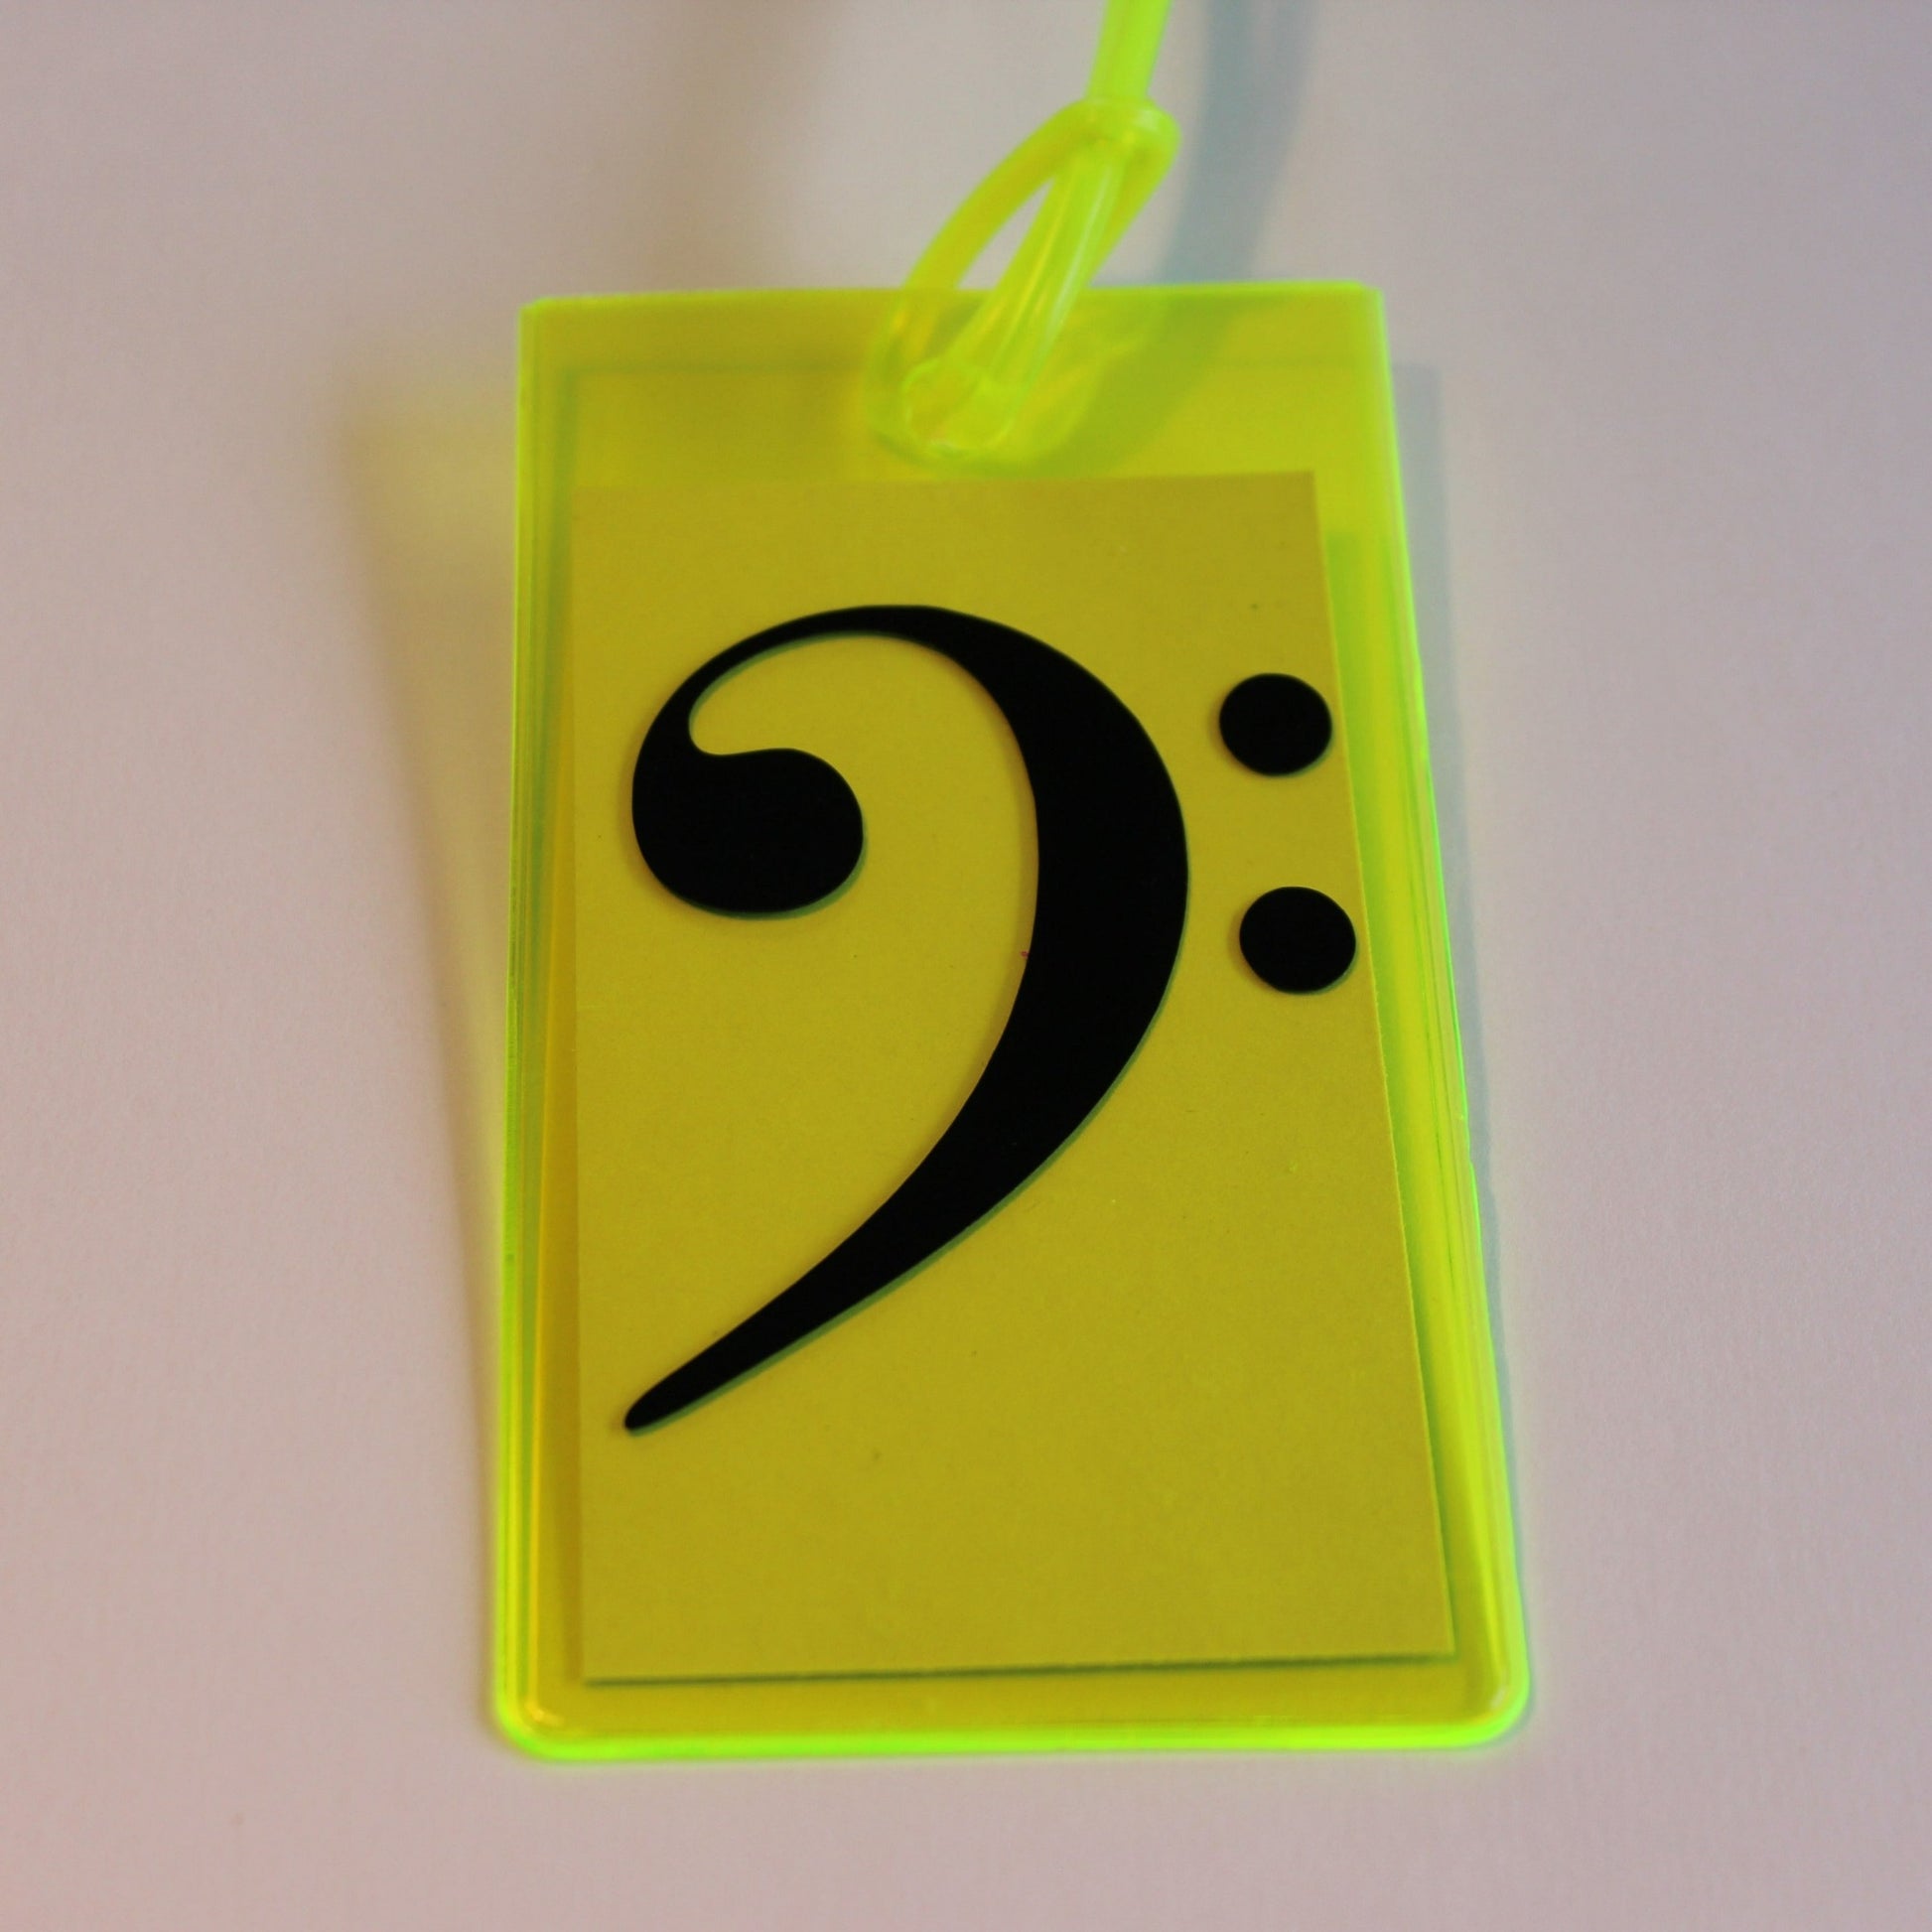 Neon yellow instrument tag with black bass clef.